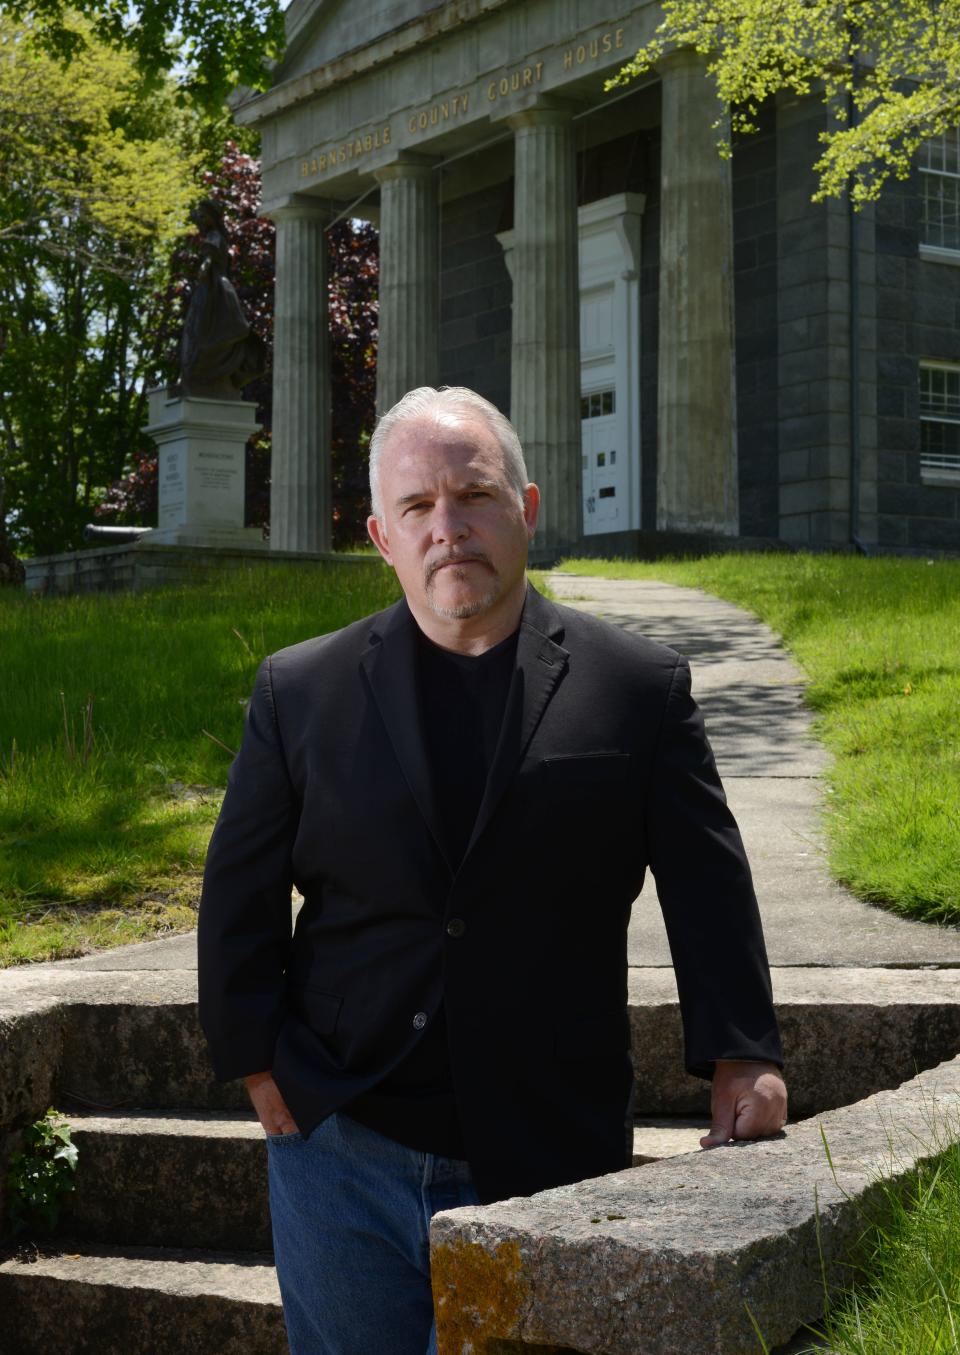 Author Casey Sherman stands outside of the Barnstable County Superior Courthouse. His latest book, "Helltown," is about Provincetown serial killer Tony Costa, whose trial took place at the courthouse.